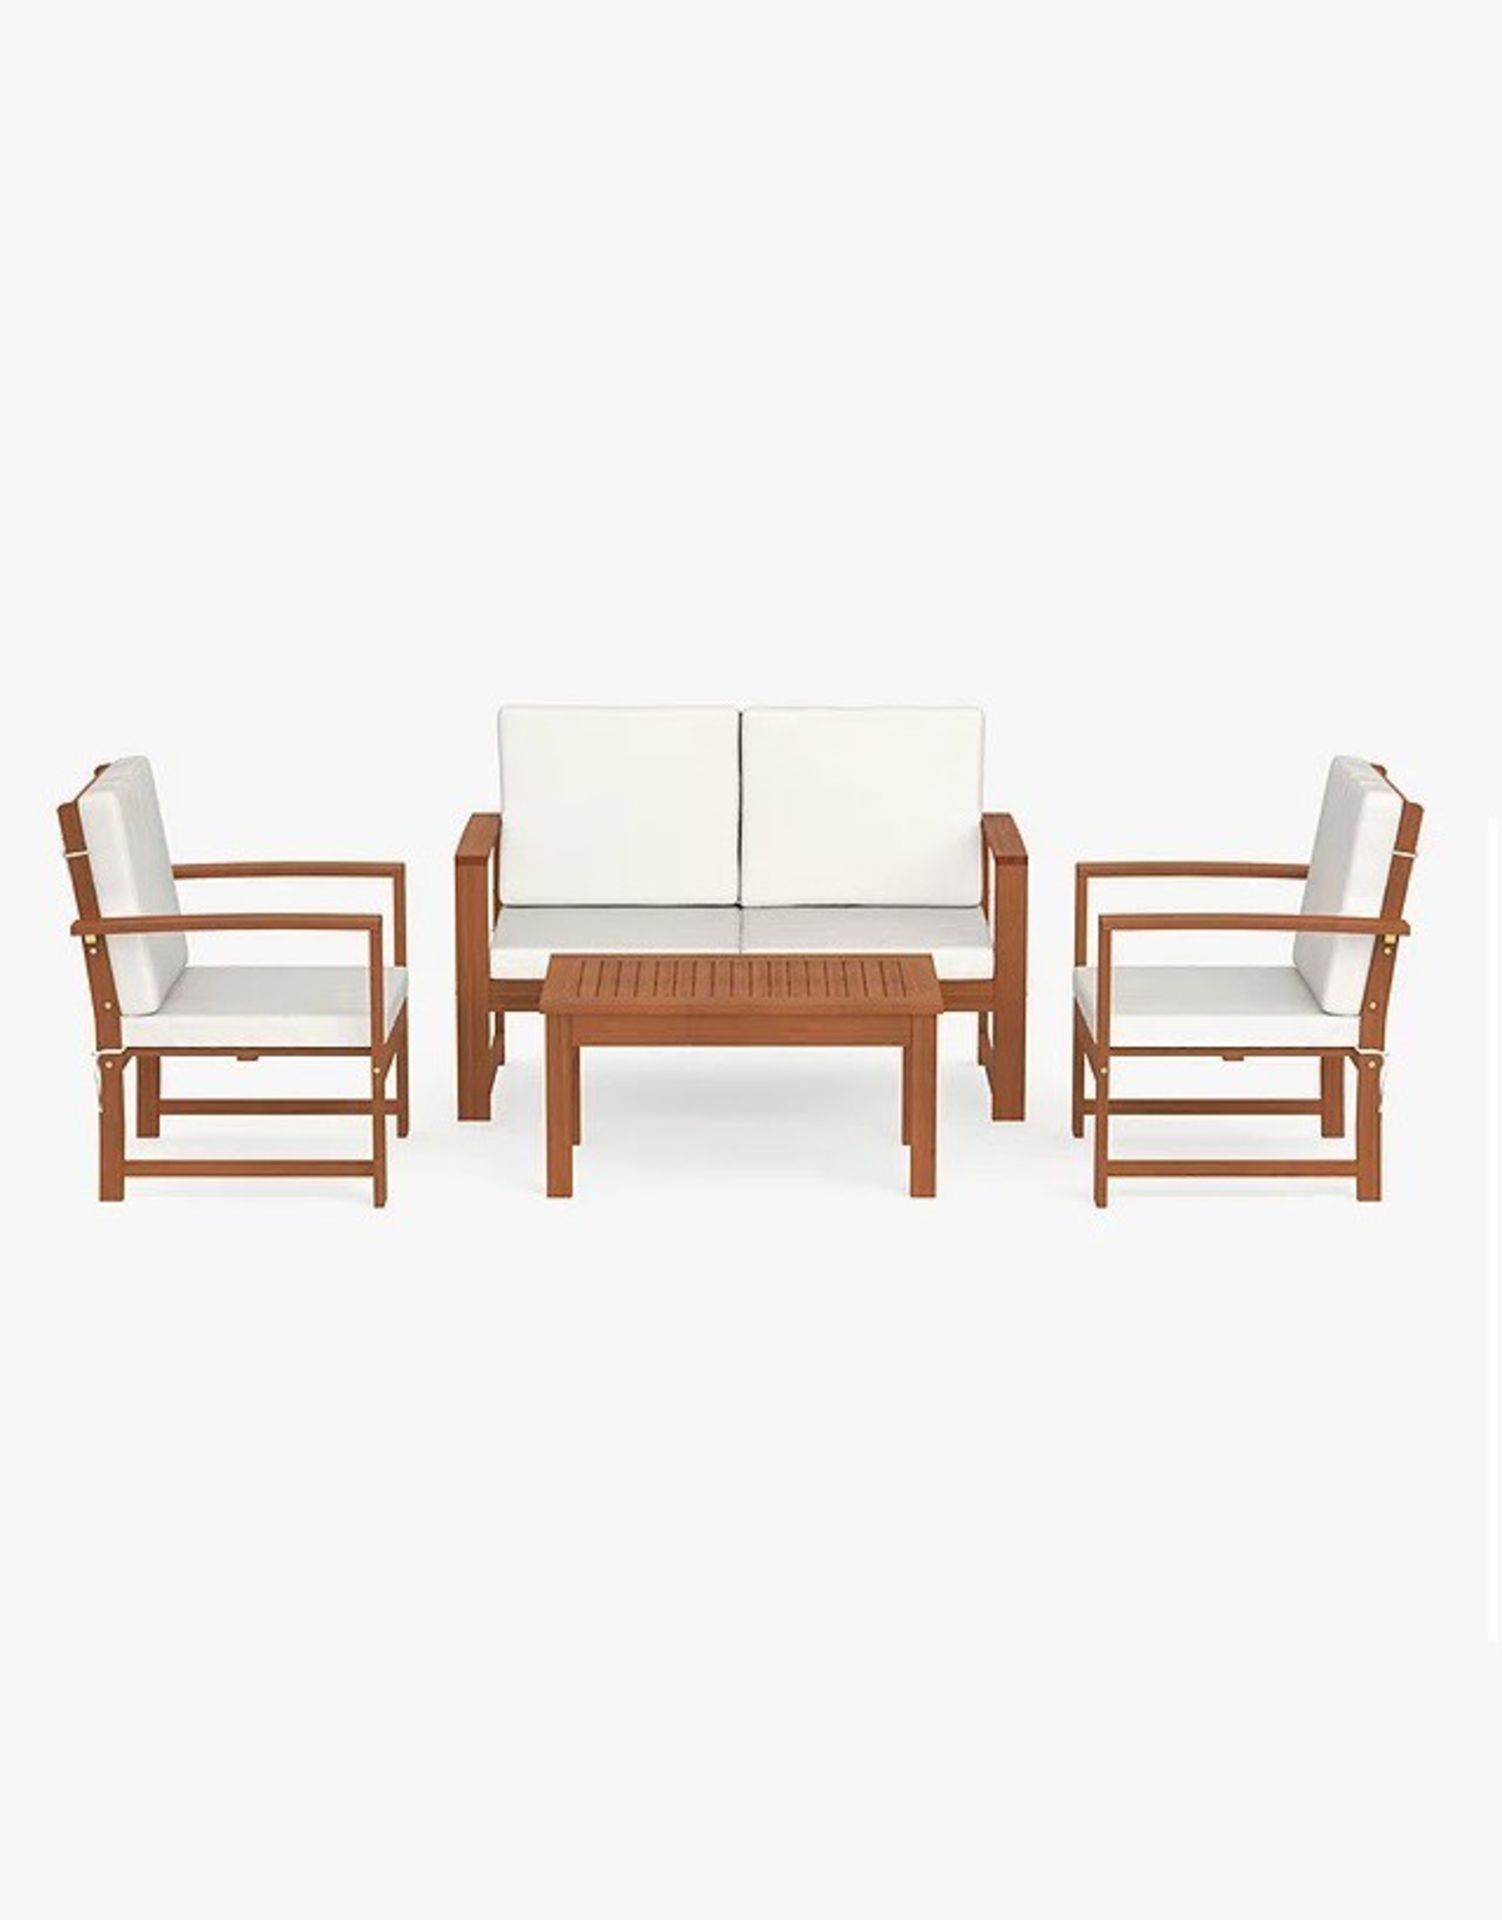 5 X BRAND NEW JOHN LEWIS 4-Seater Garden Lounging Table & Chairs Set. RRP £898.50. Upgrade your - Image 2 of 3